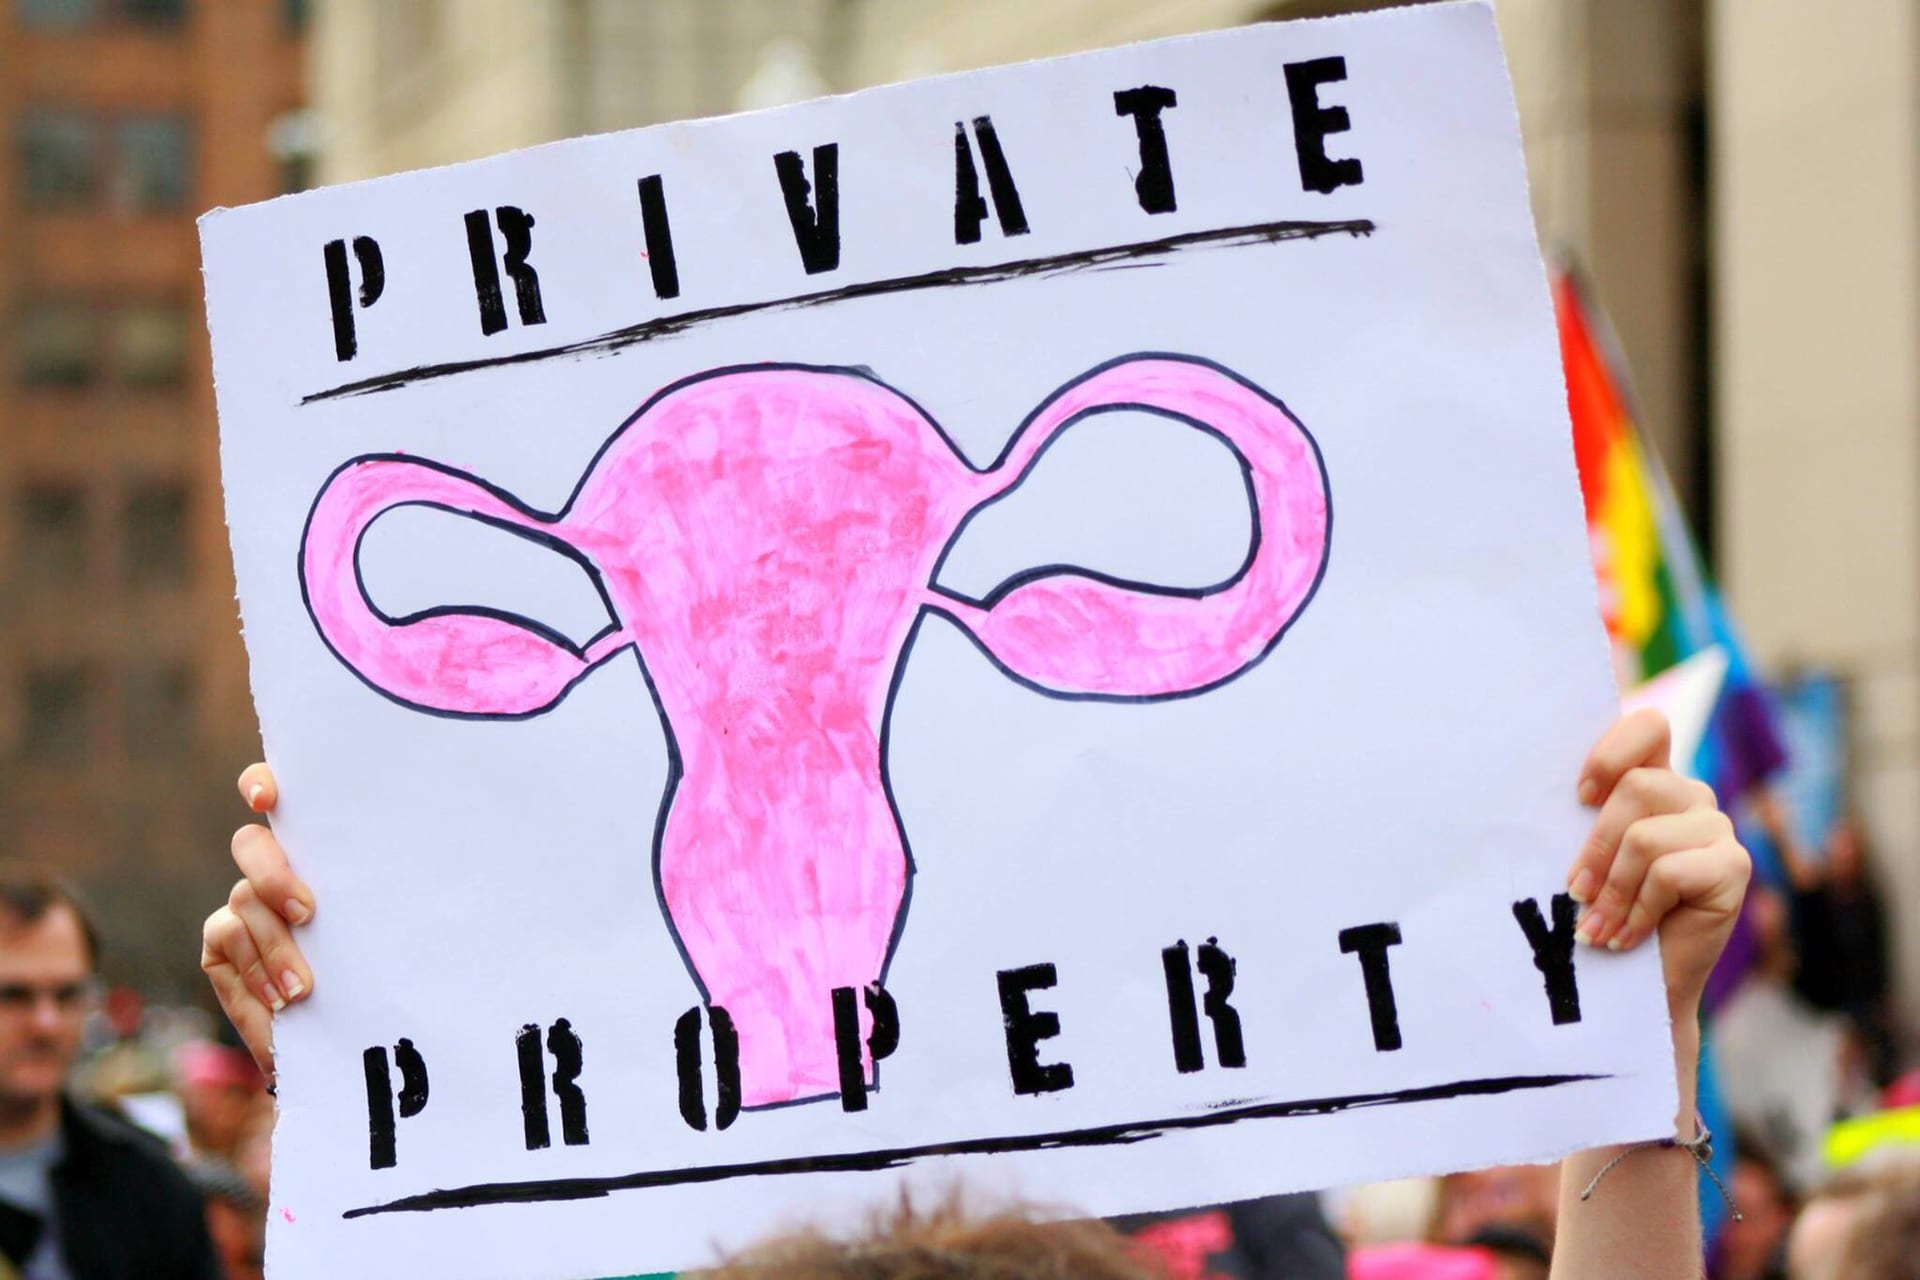 Abortion Bans Are About Power & Control of Women’s Bodies